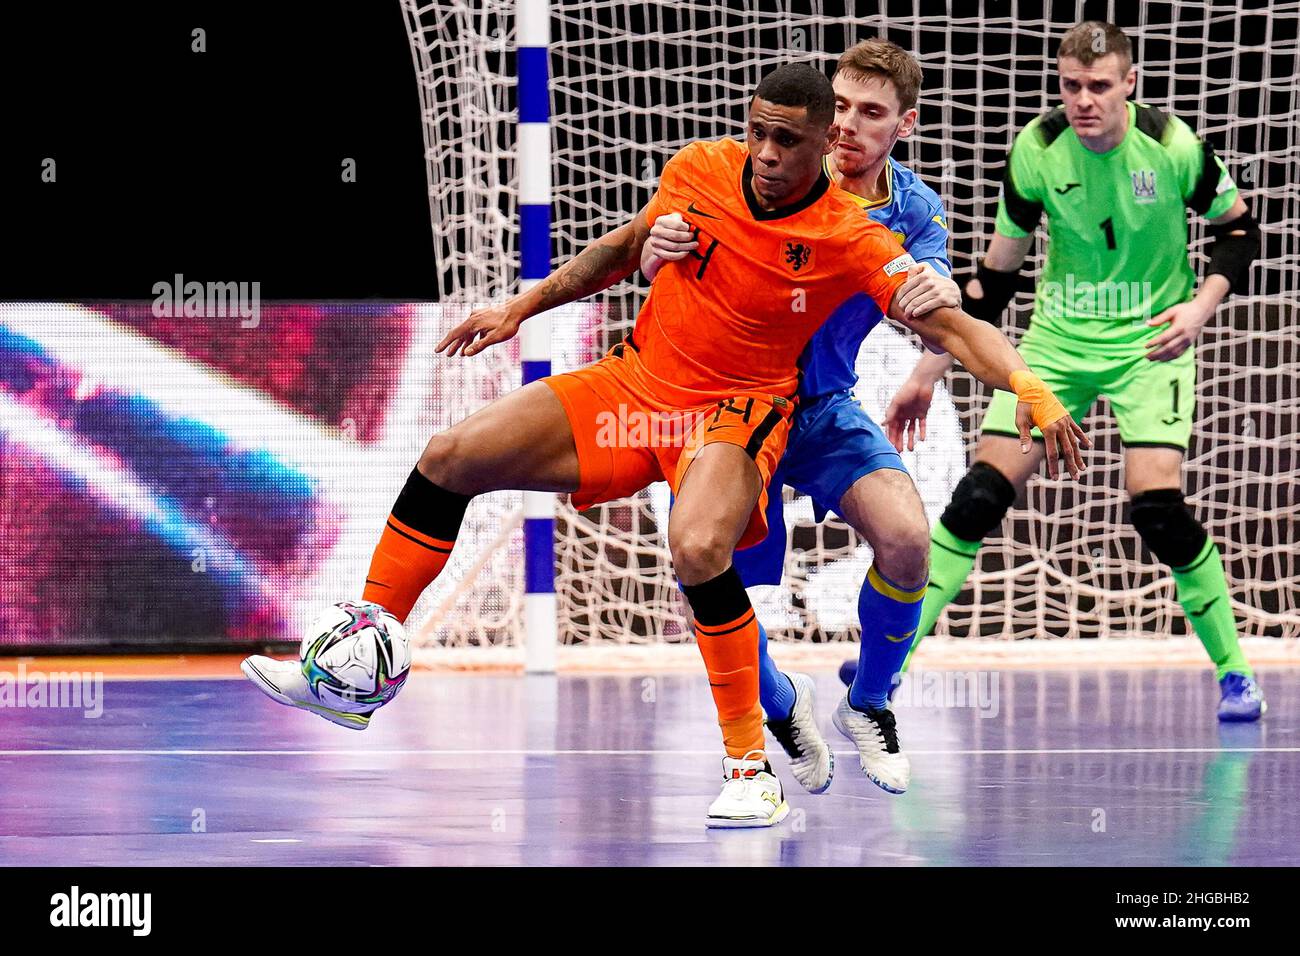 AMSTERDAM, NETHERLANDS - JANUARY 19: Jordany Martinus of the Netherlands, Yevgen Siryi of Ukraine during the Men's Futsal Euro 2022 Group A match between Netherlands and the Ukraine at the Ziggo Dome on January 19, 2022 in Amsterdam, Netherlands (Photo by Jeroen Meuwsen/Orange Pictures) Stock Photo